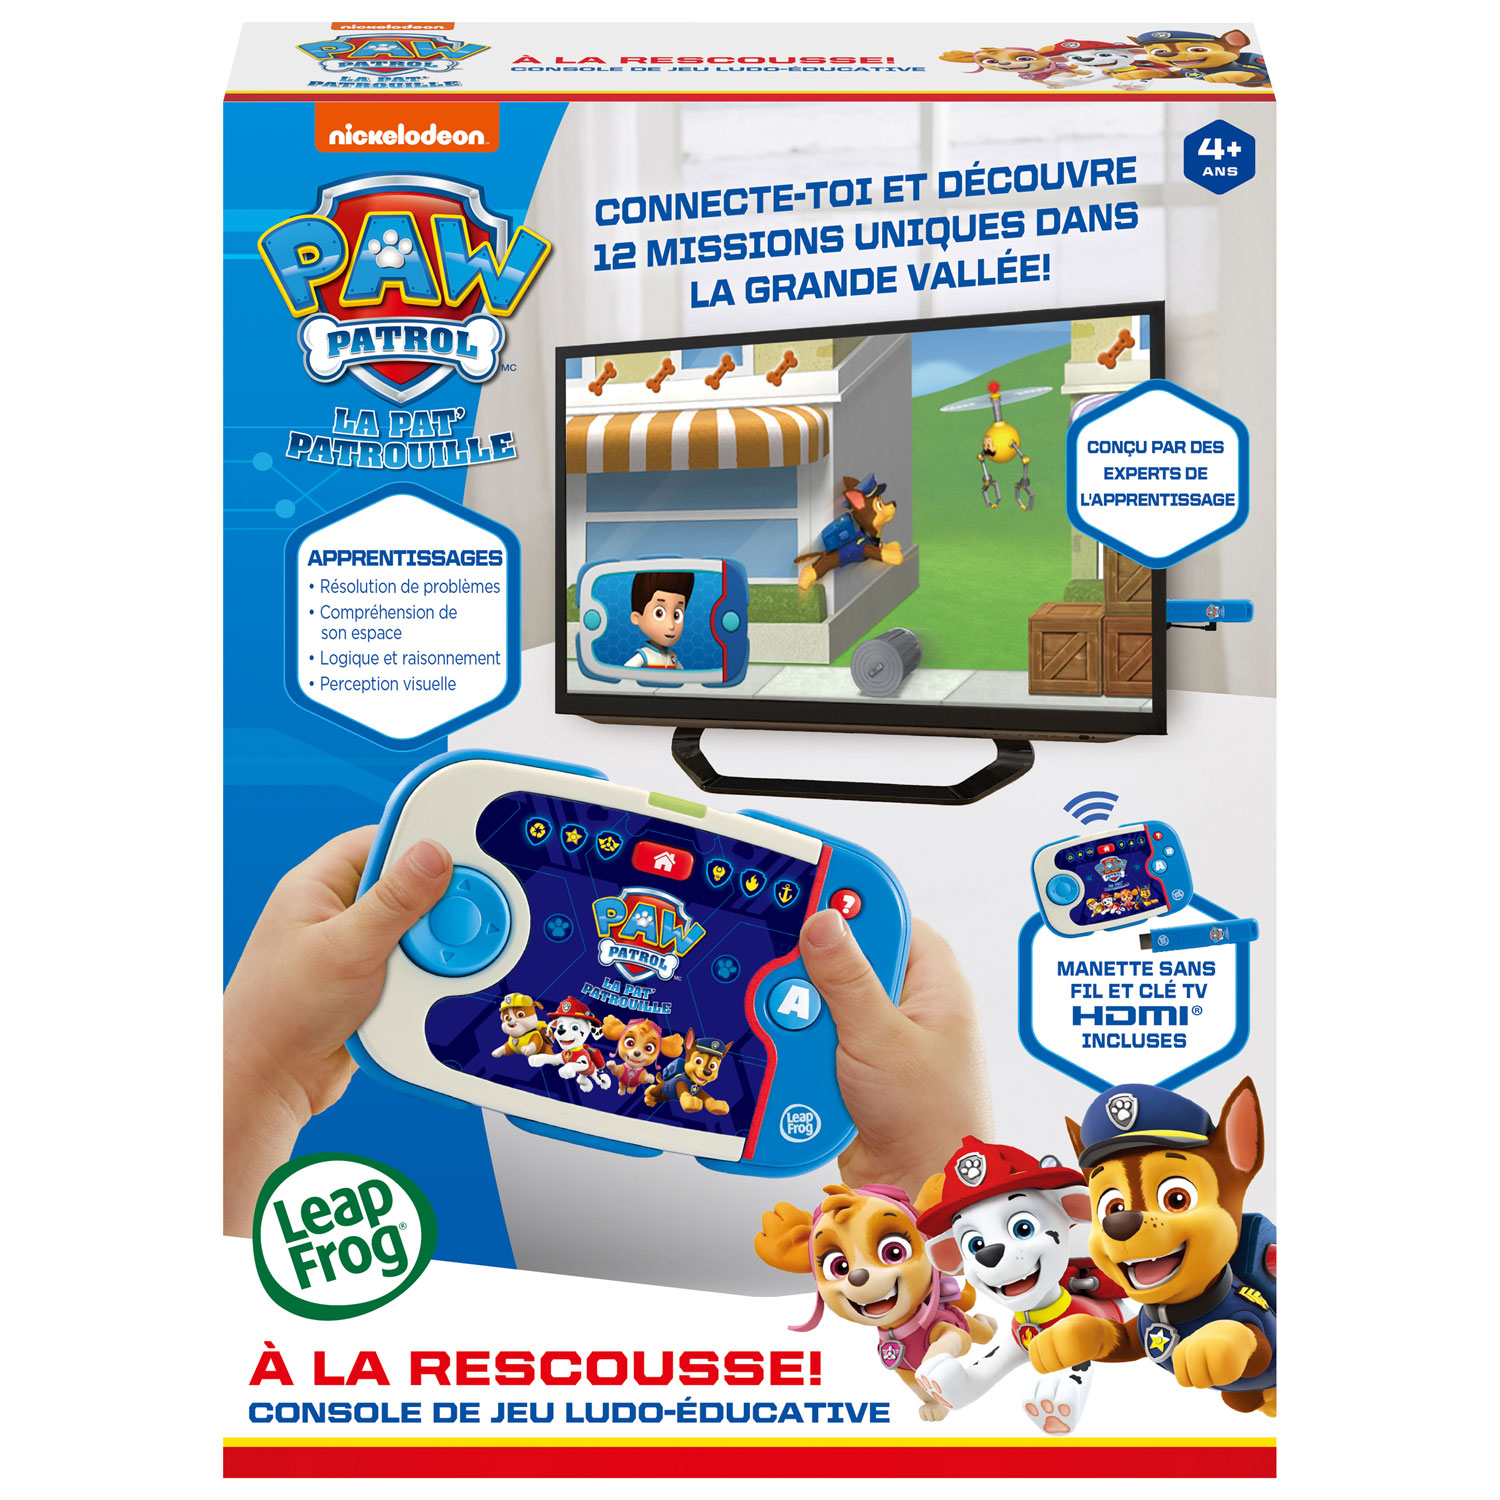 LeapFrog PAW Patrol: To the Rescue! Video Game - French